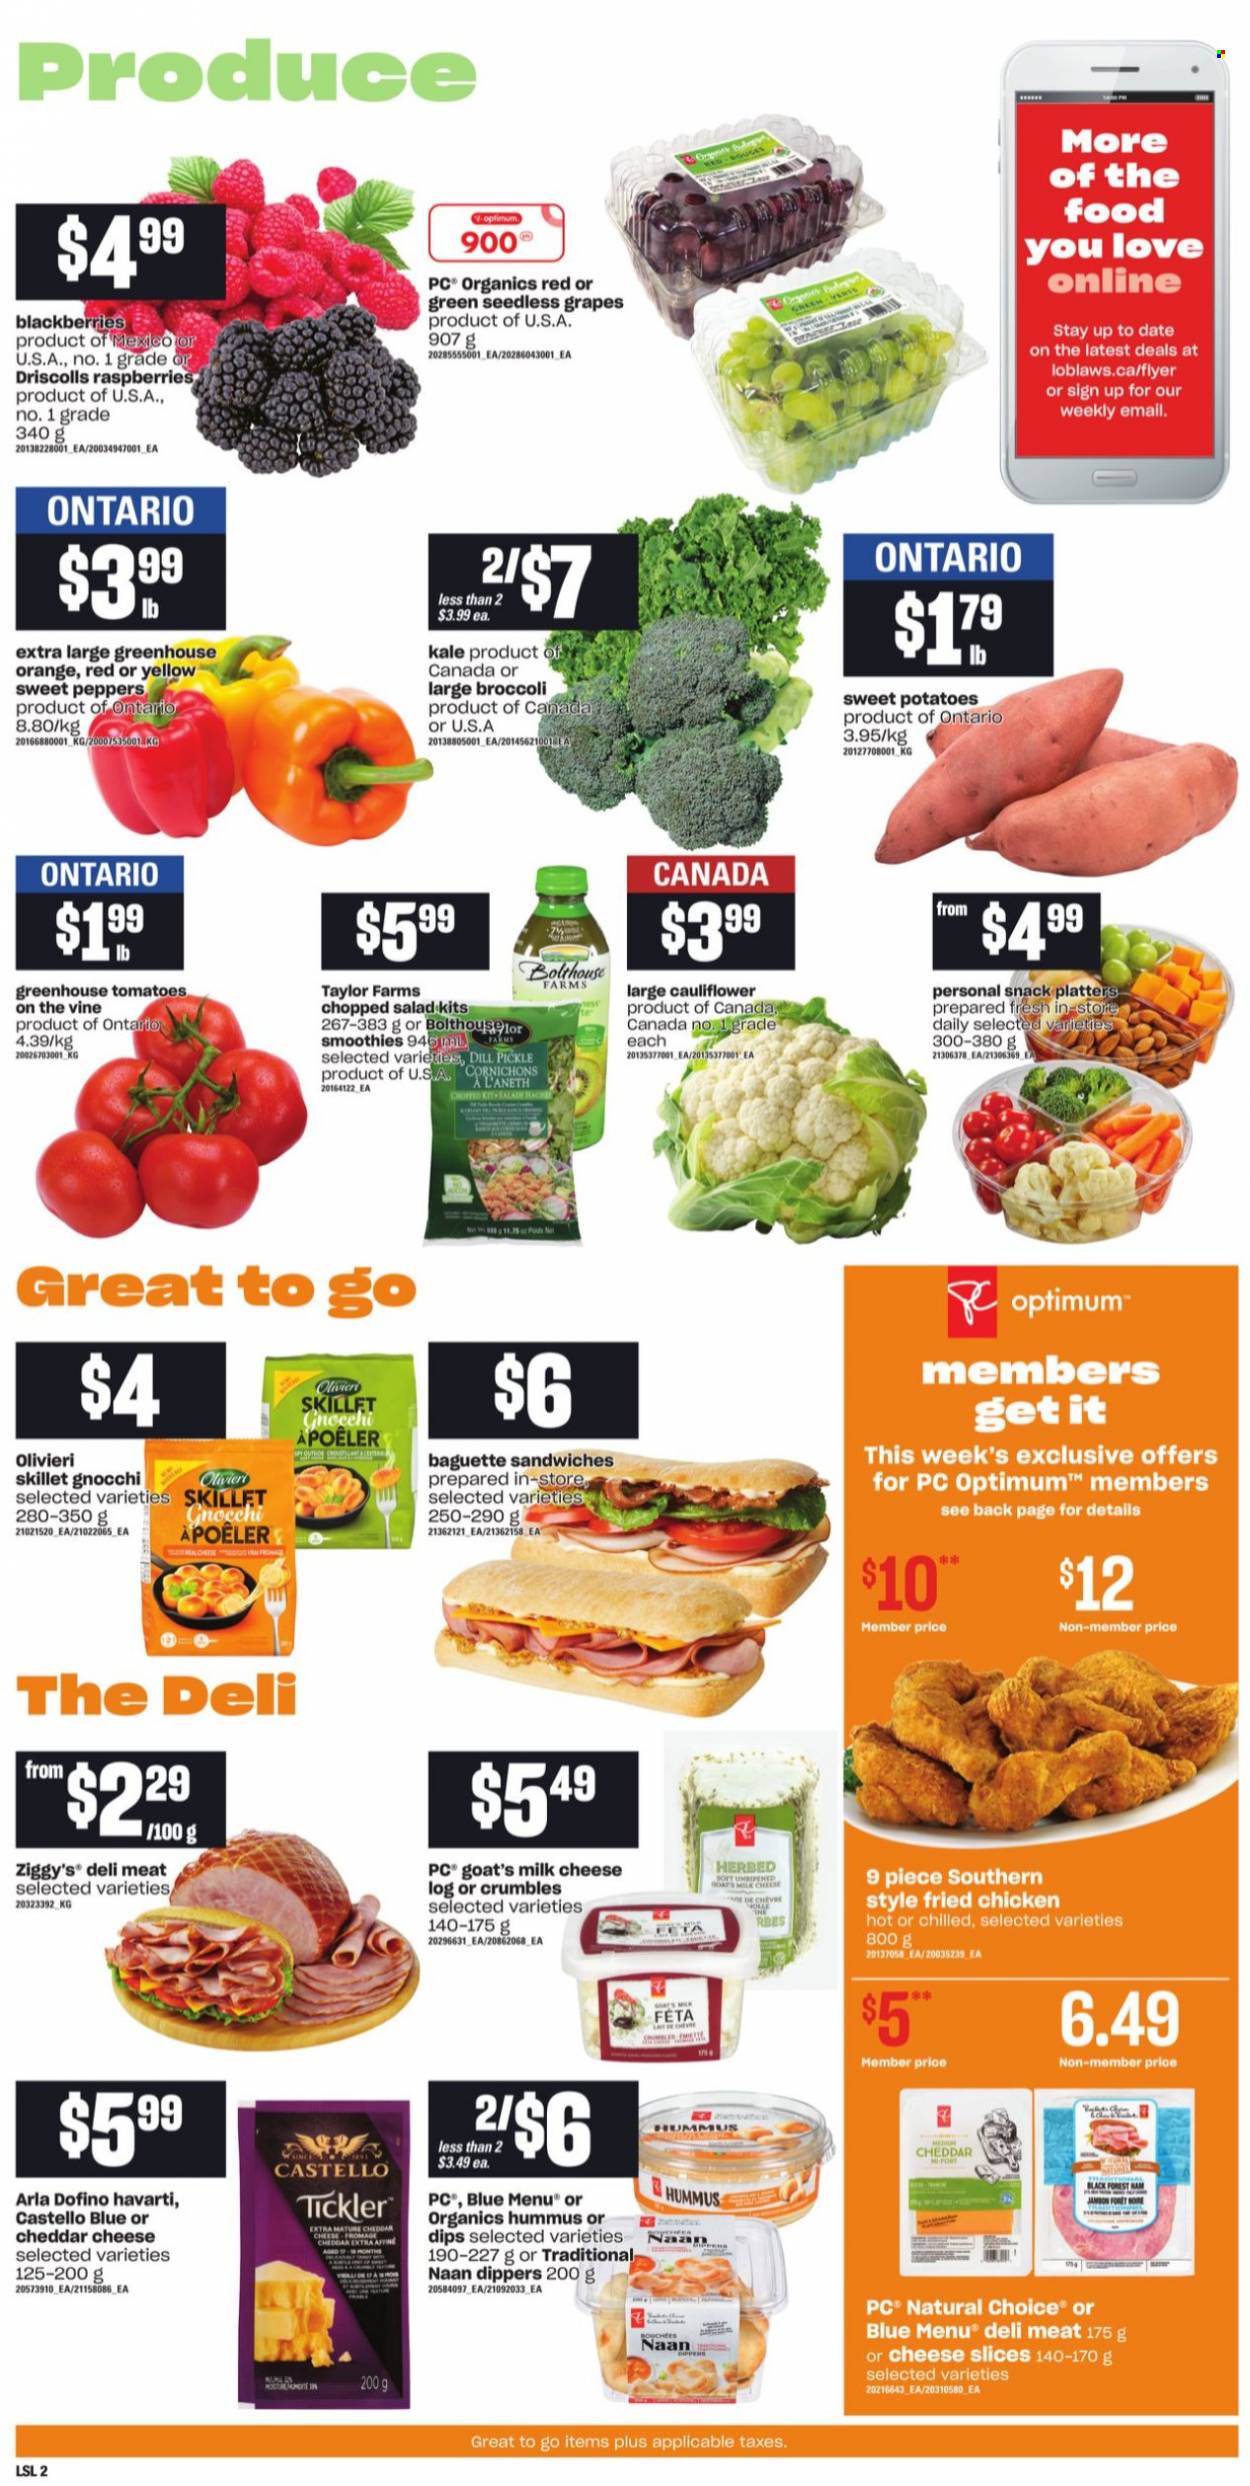 thumbnail - Loblaws Flyer - October 21, 2021 - October 27, 2021 - Sales products - broccoli, cauliflower, sweet peppers, sweet potato, tomatoes, kale, potatoes, salad, peppers, chopped salad, blackberries, grapes, seedless grapes, sandwich, fried chicken, hummus, sliced cheese, Havarti, feta, Arla, milk, smoothie, Optimum, baguette, gnocchi. Page 3.